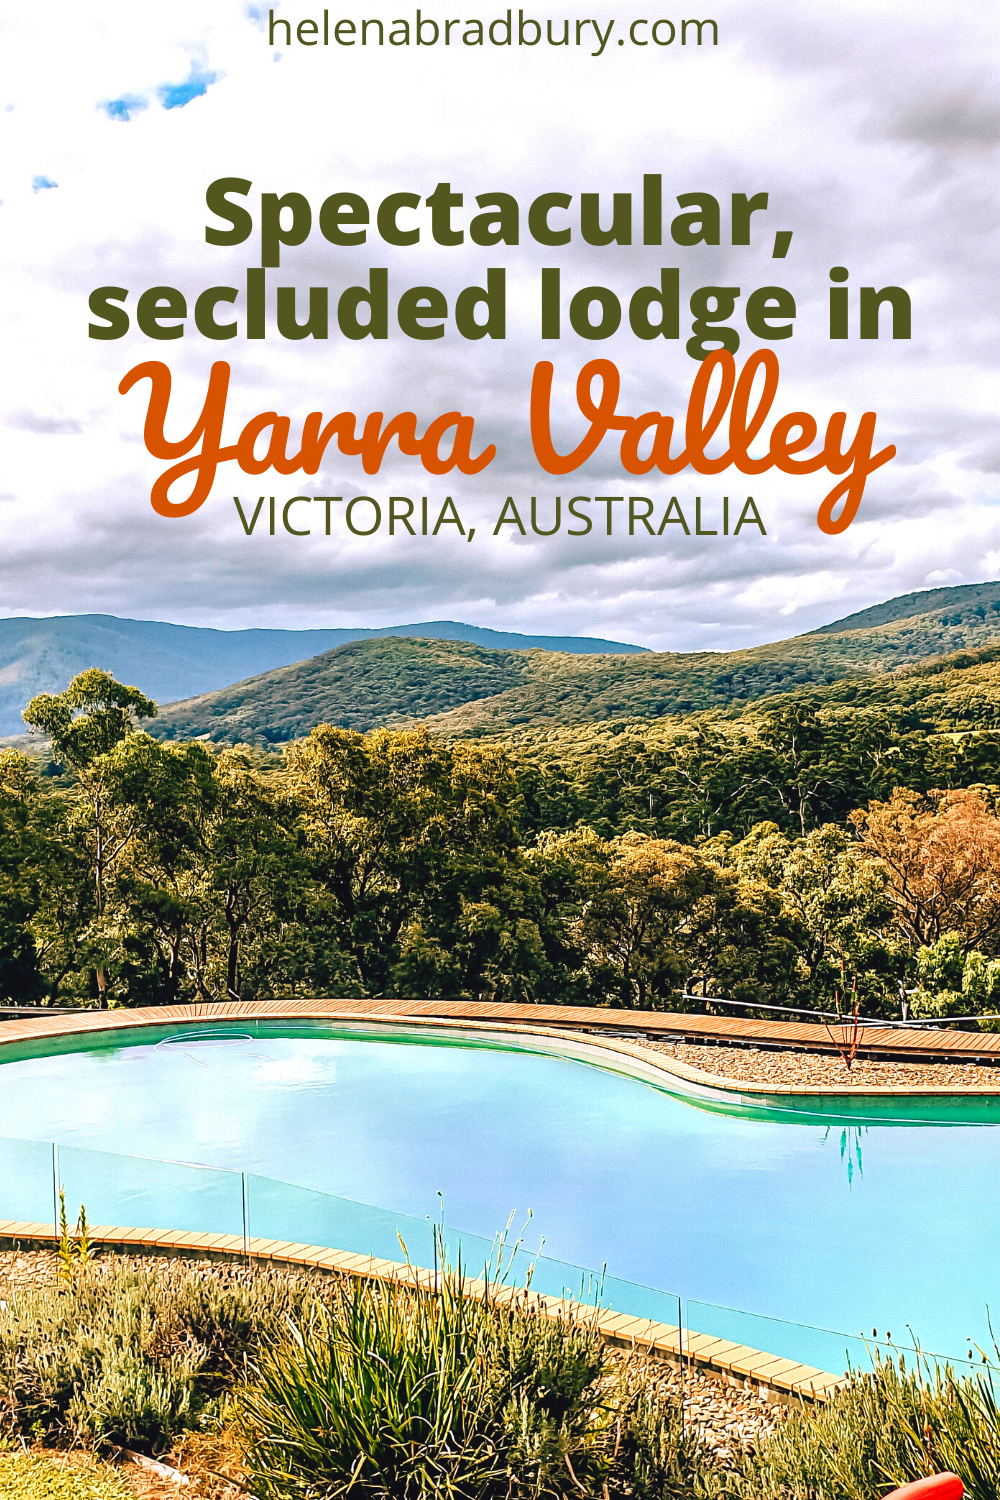 Kangaroo Manor - the most spectacular Yarra Valley Lodge you have to stay in